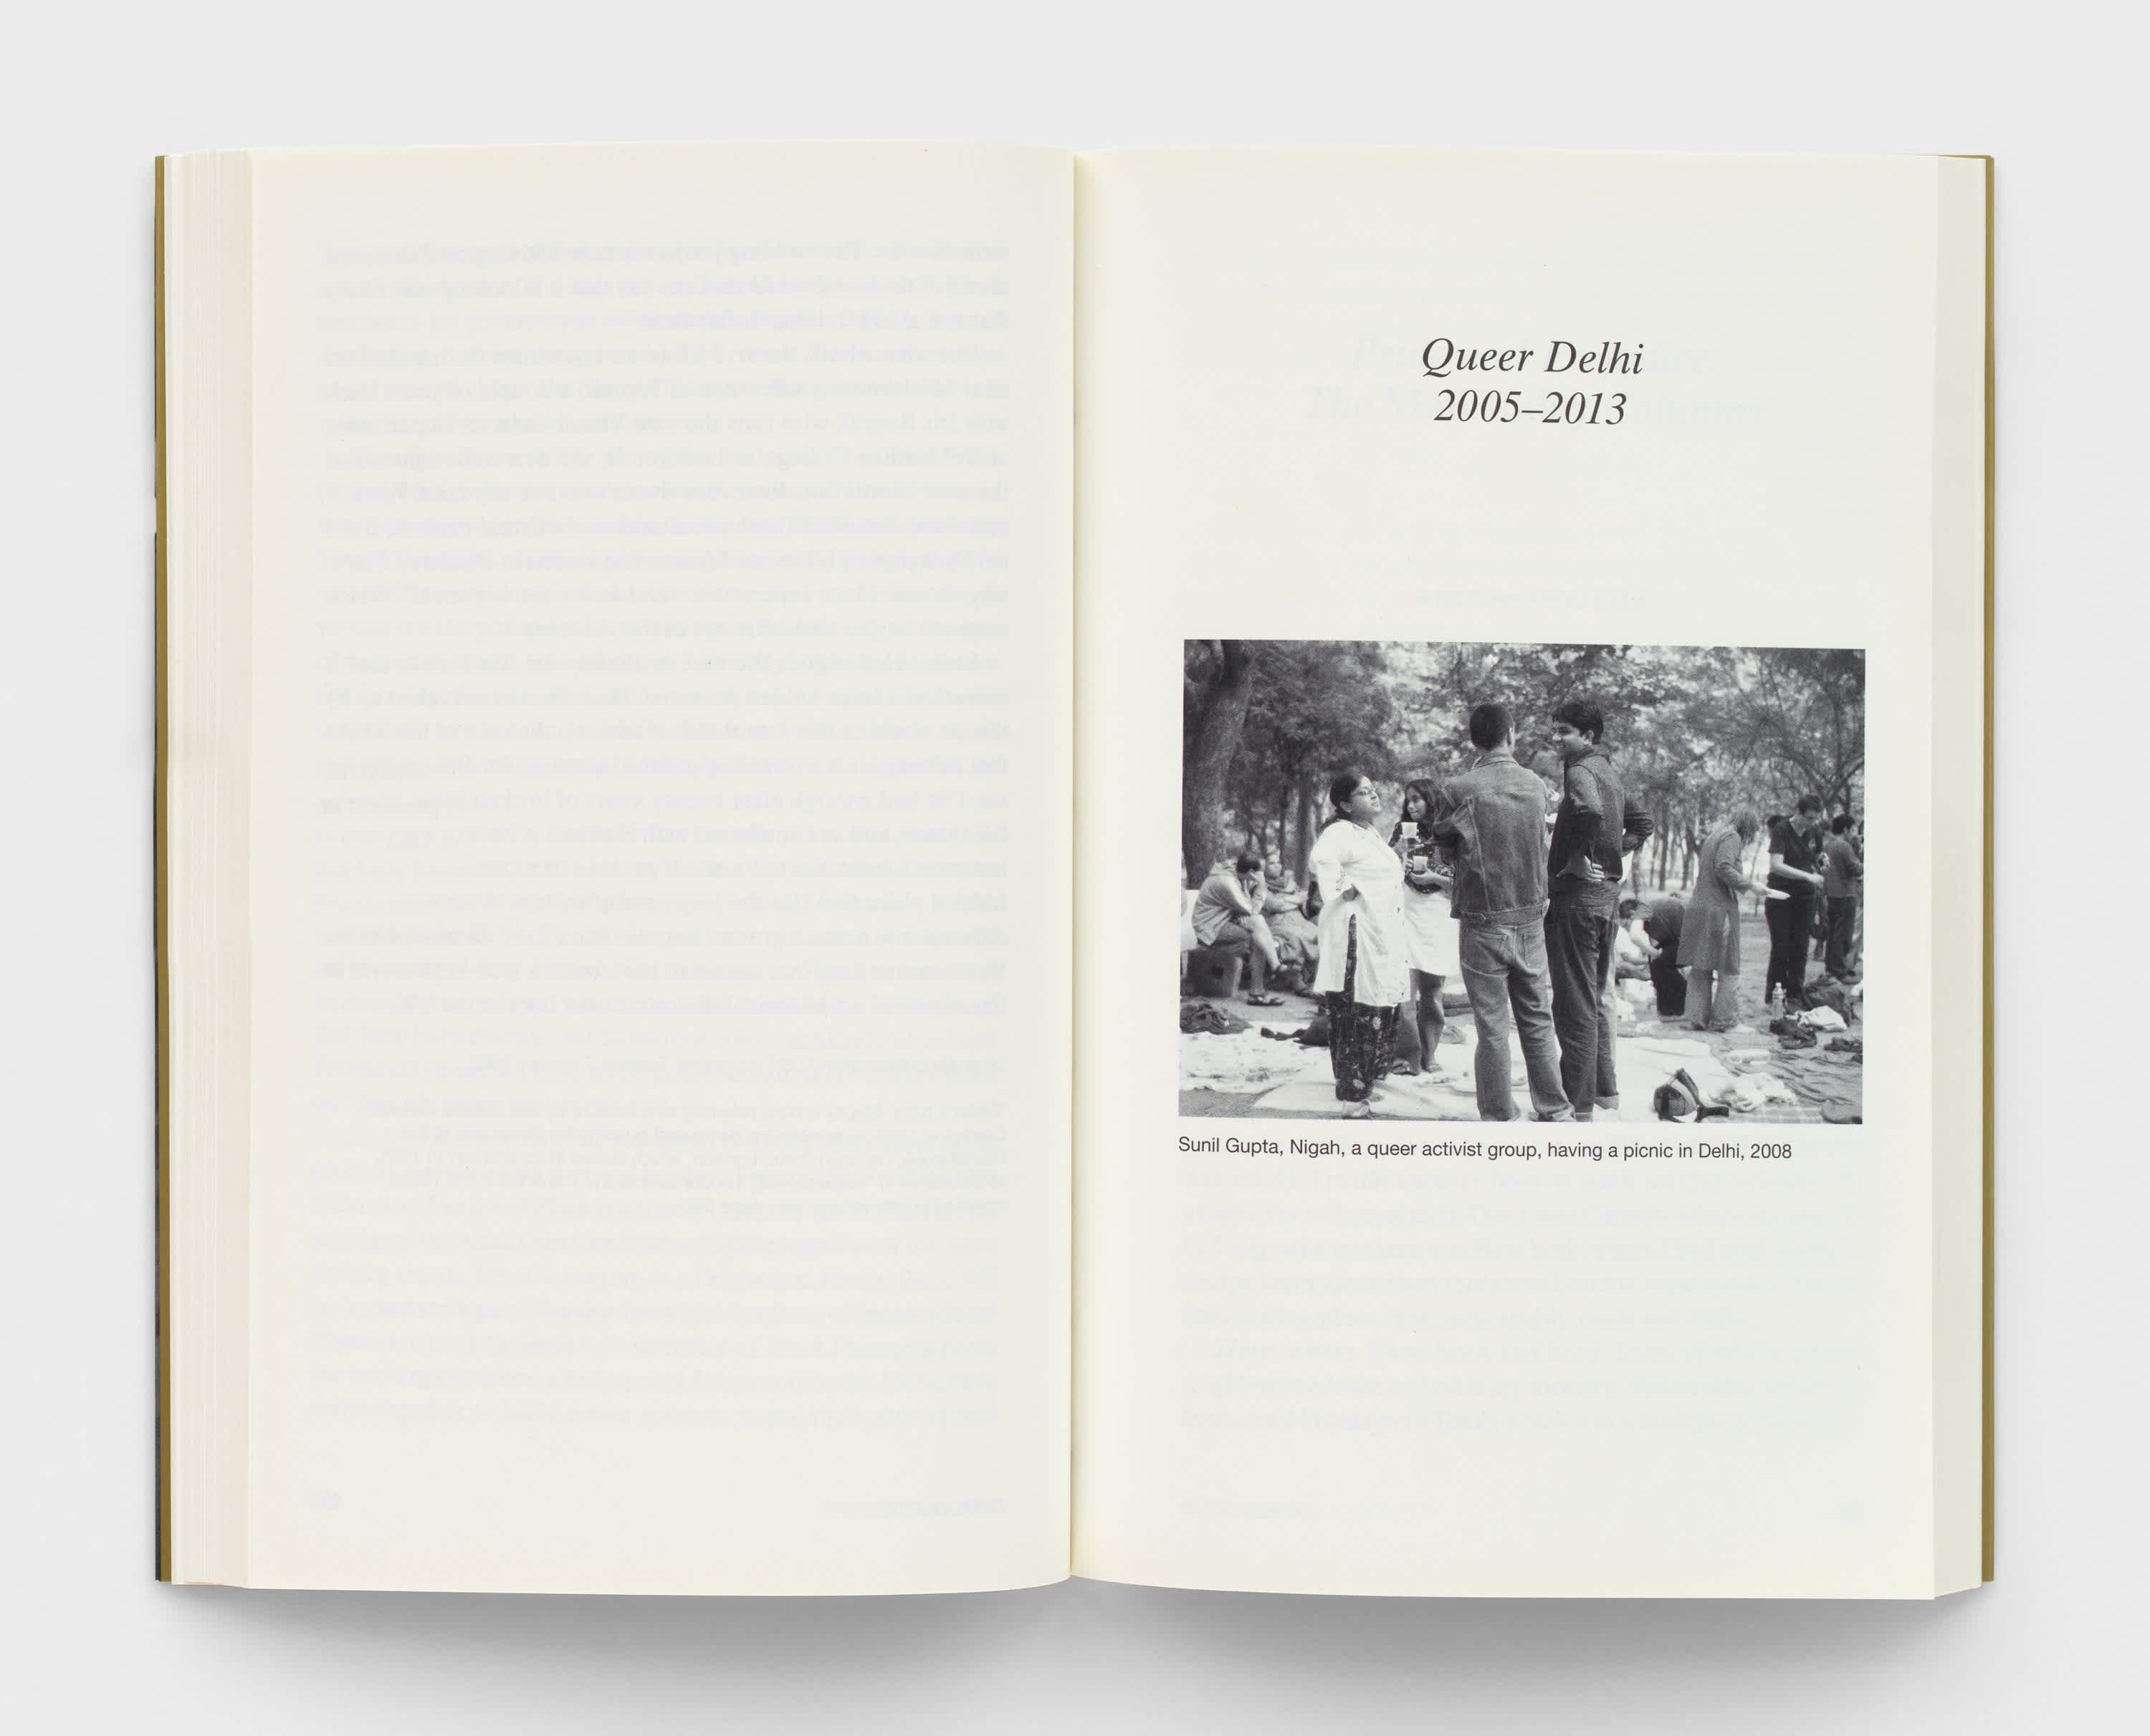 An open book with cream colored pages. The left page is blank and the right page has a title and dates above a black and white photograph of a queer activist group in Delhi, India.